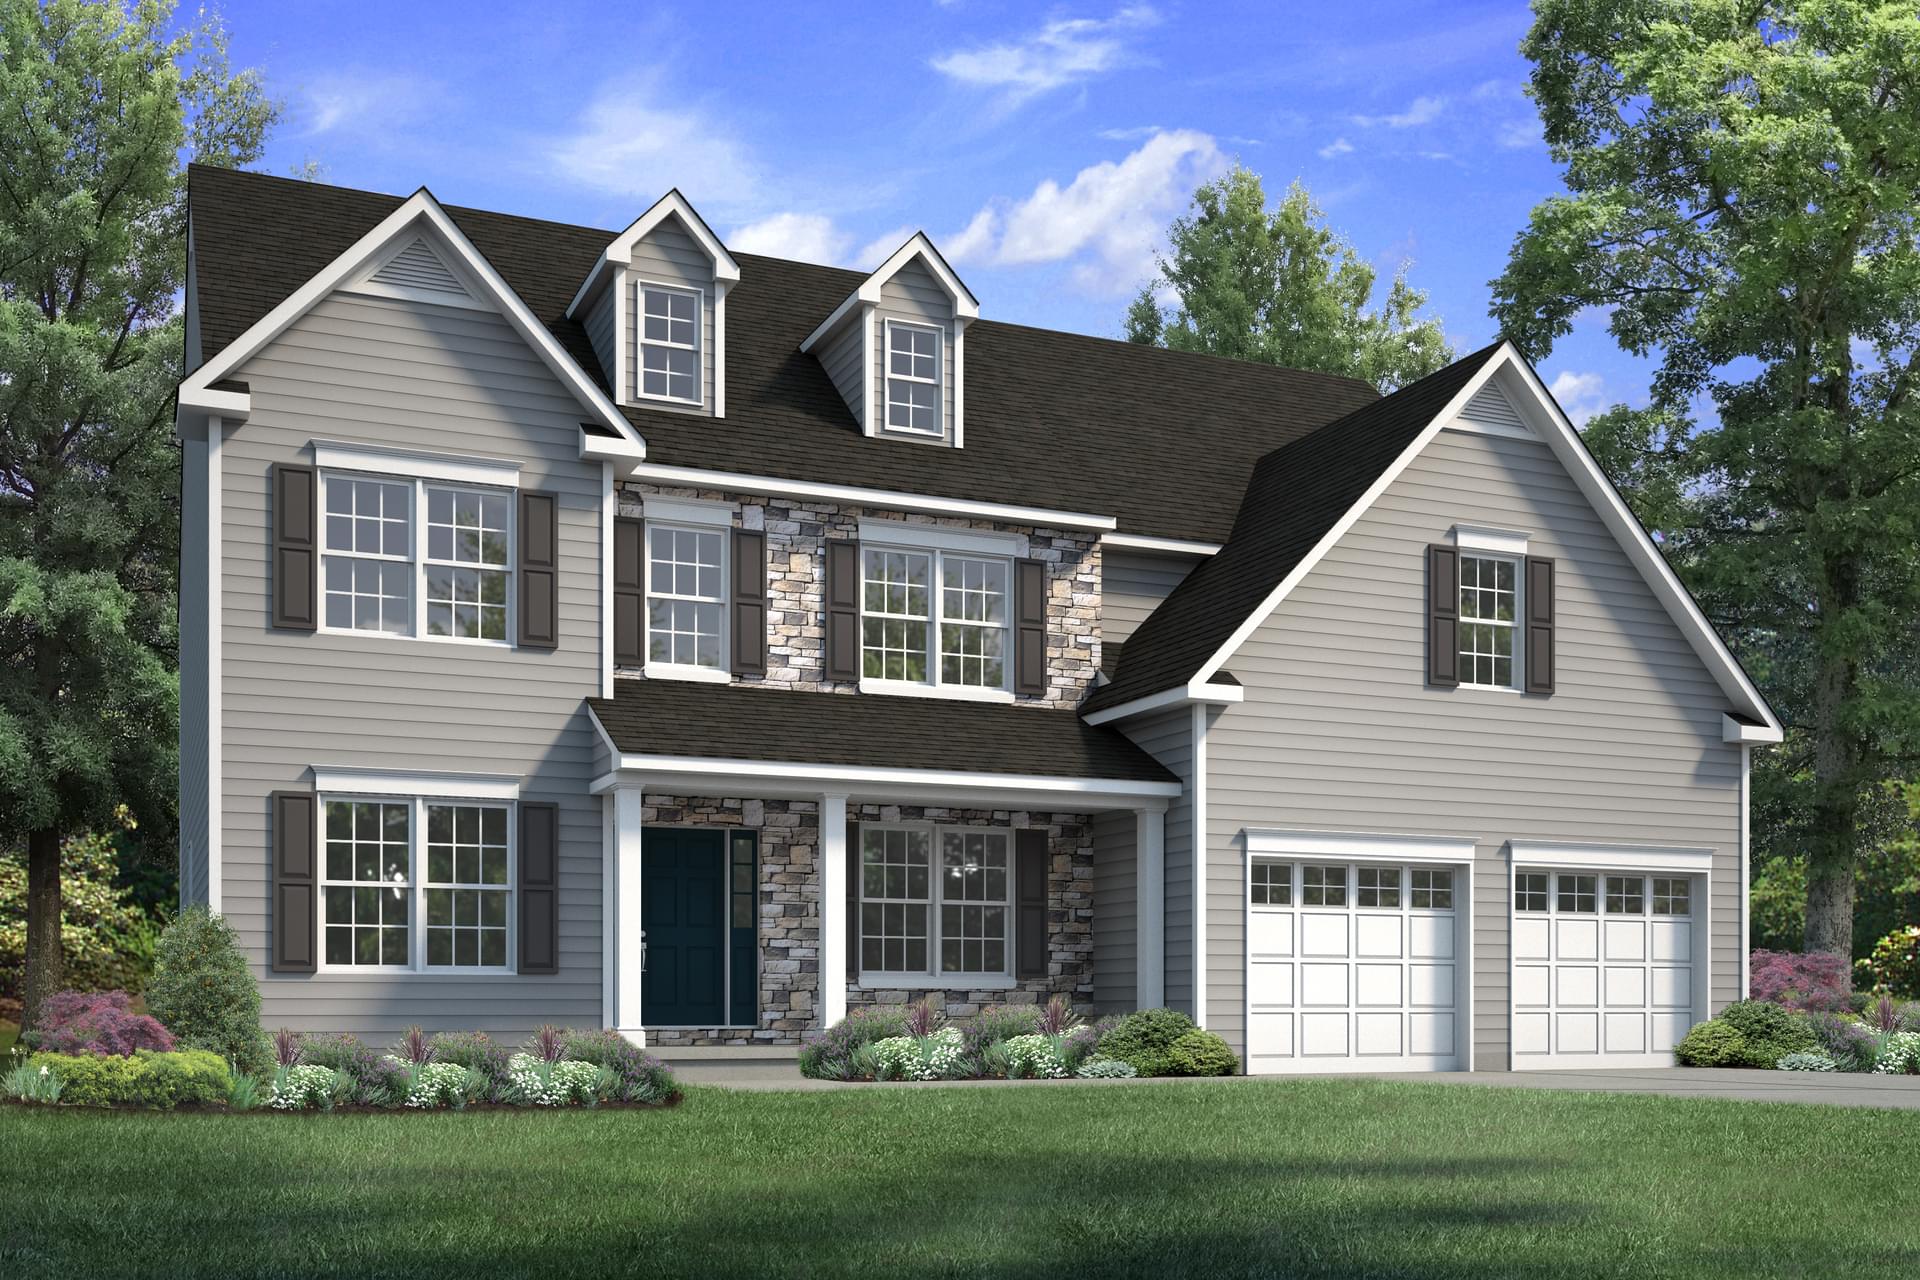 The Breckenridge New Home in Mountain Top PA - Hillcrest Estates at Mountain Top